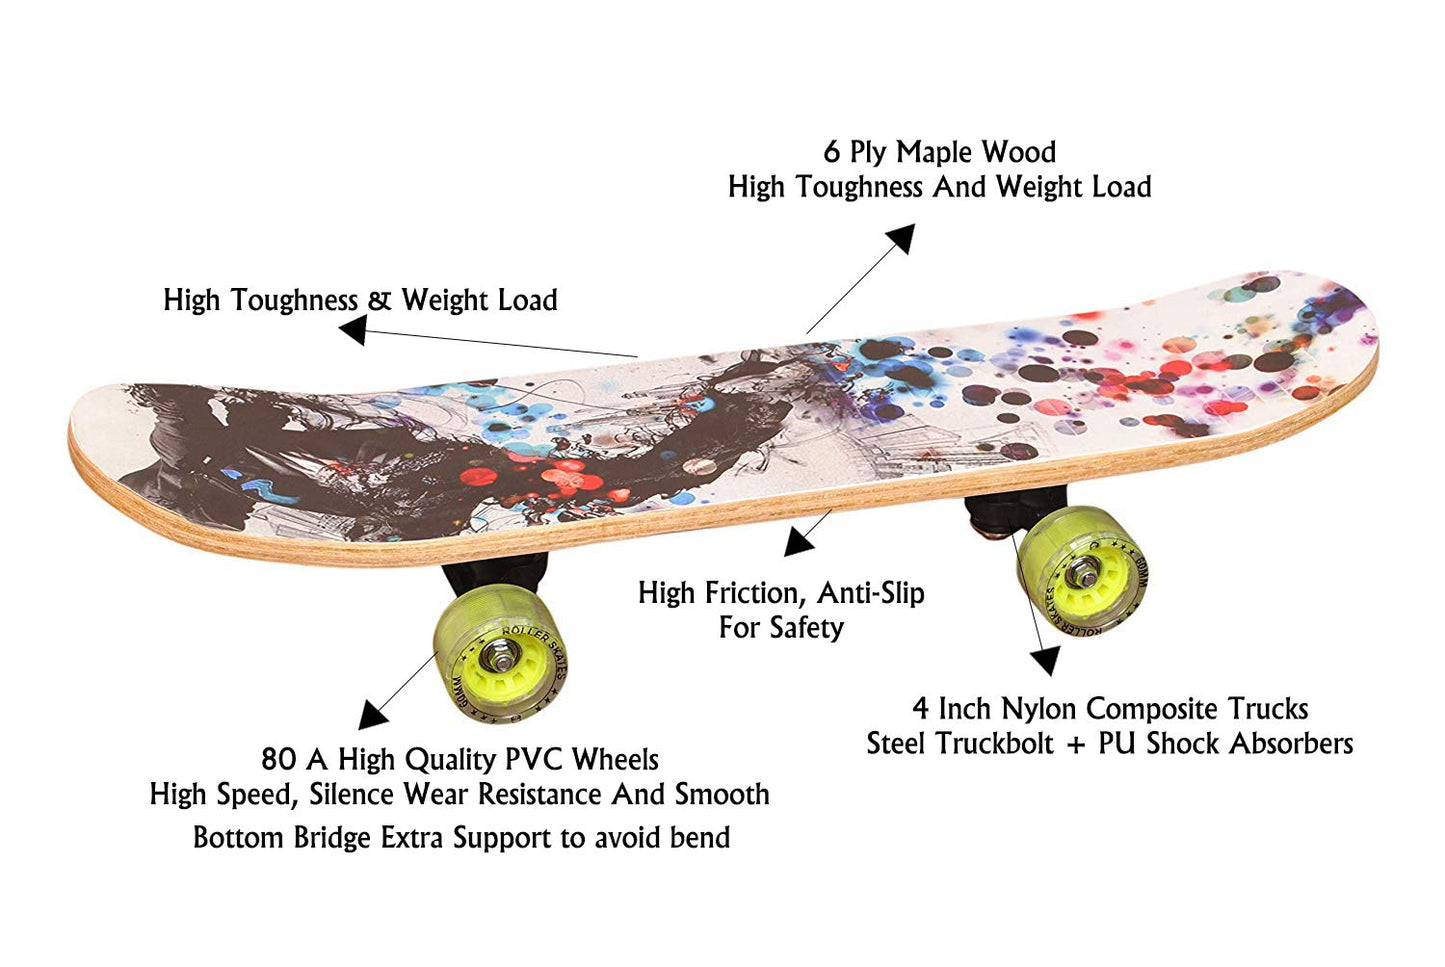 Skateboards For Kids, Skating, Fiber Skateboard Specially Designed With A Pro Pattern And Length Of 27" X 6.5" Width